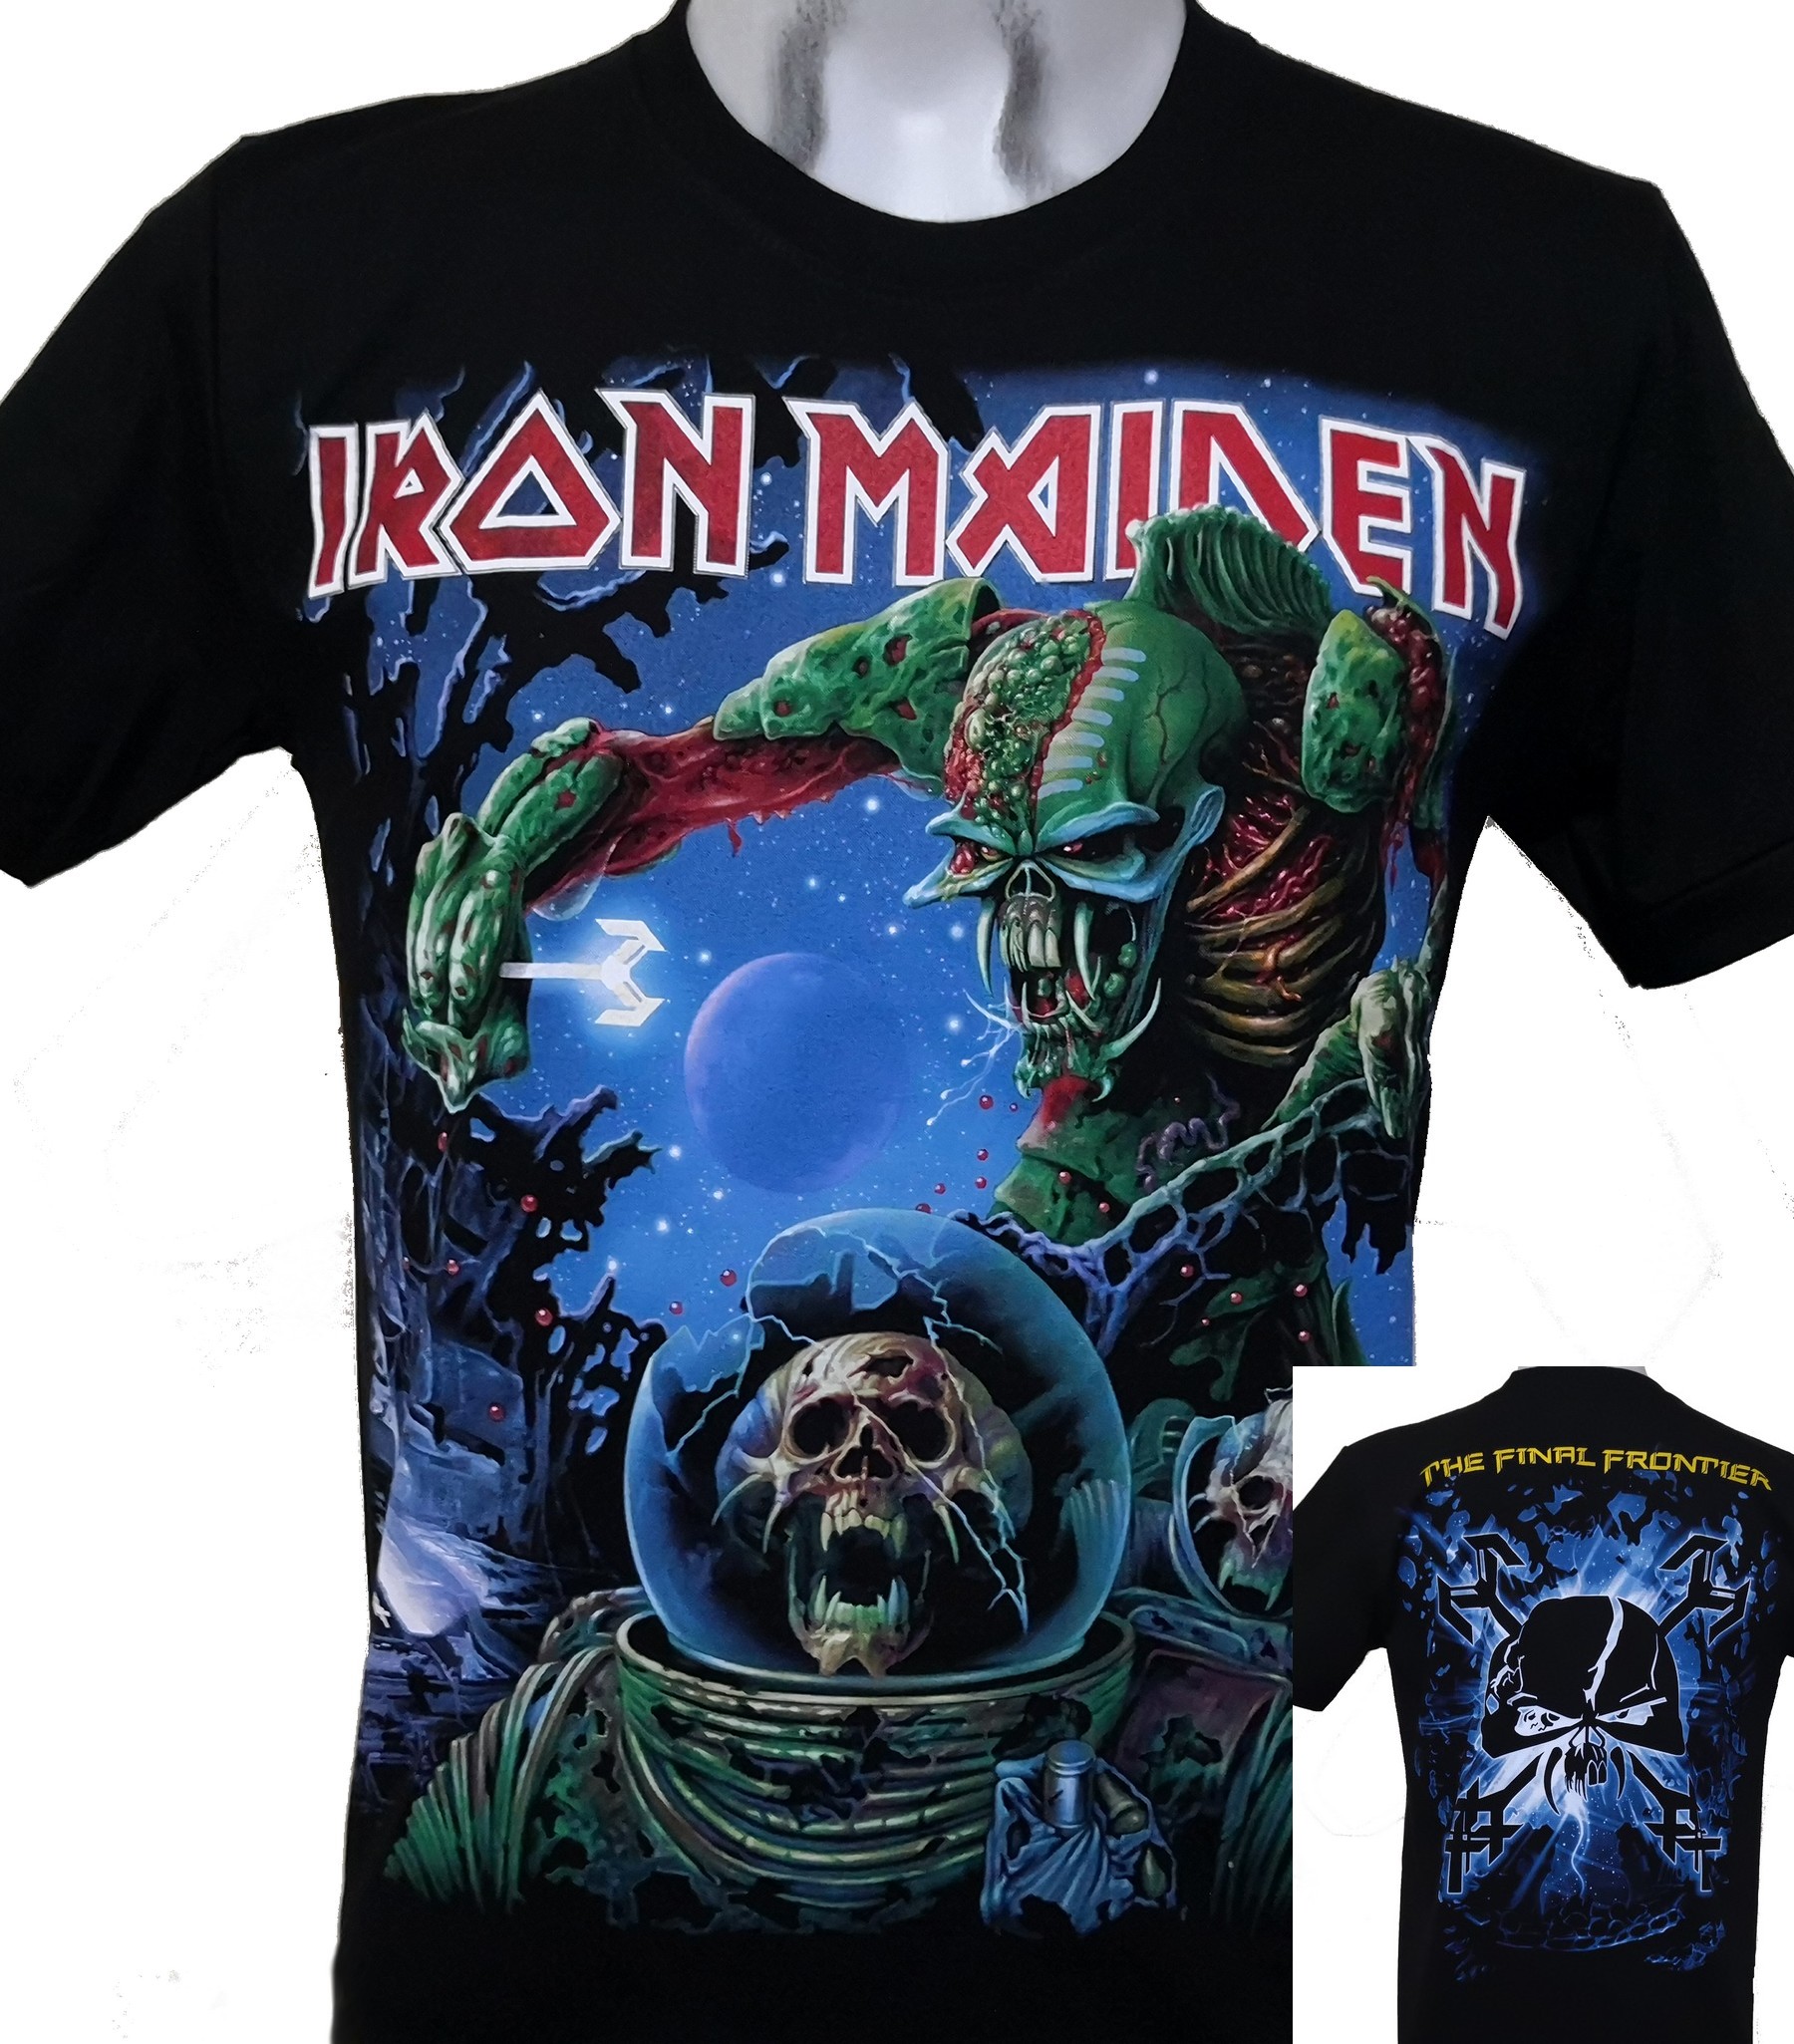 Iron Maiden t-shirt The Final Frontier size L